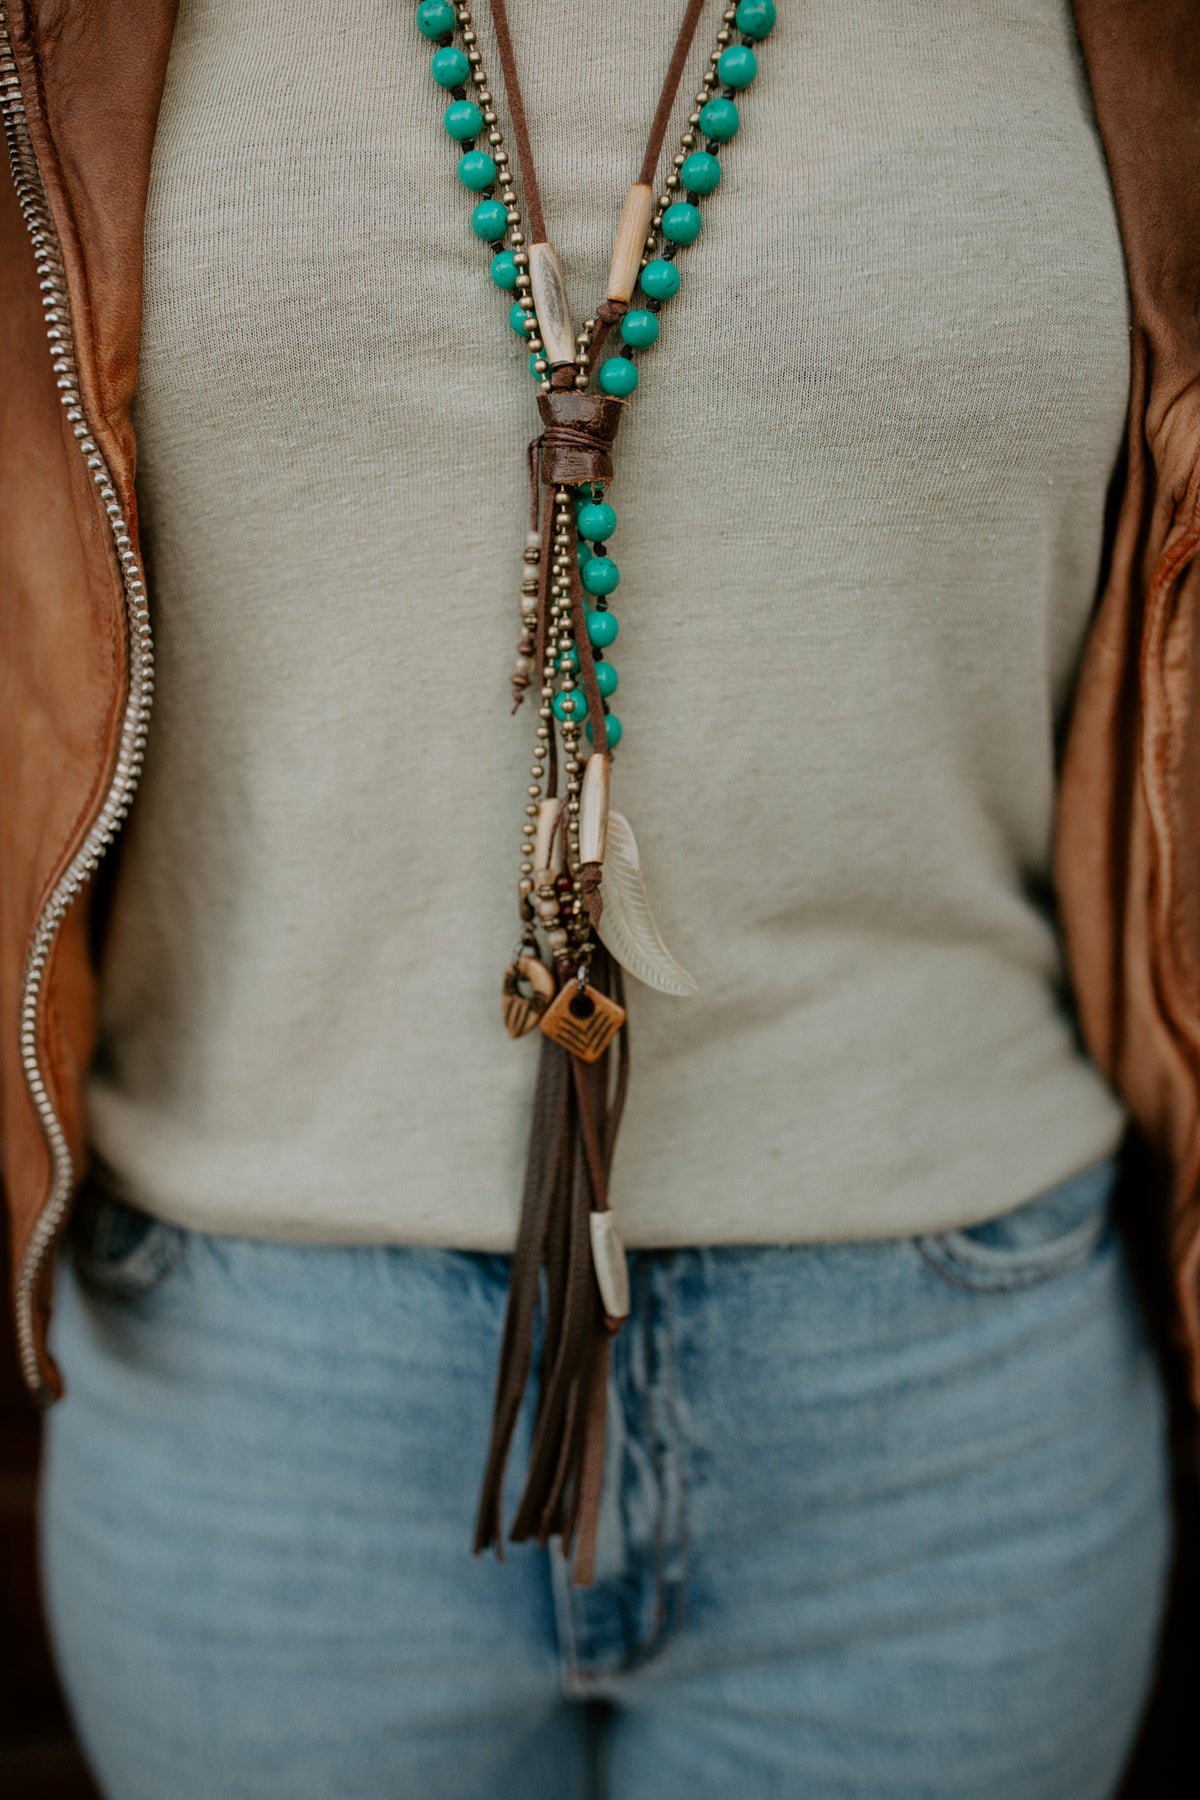 Tasseled Turquoise Clutch Necklace